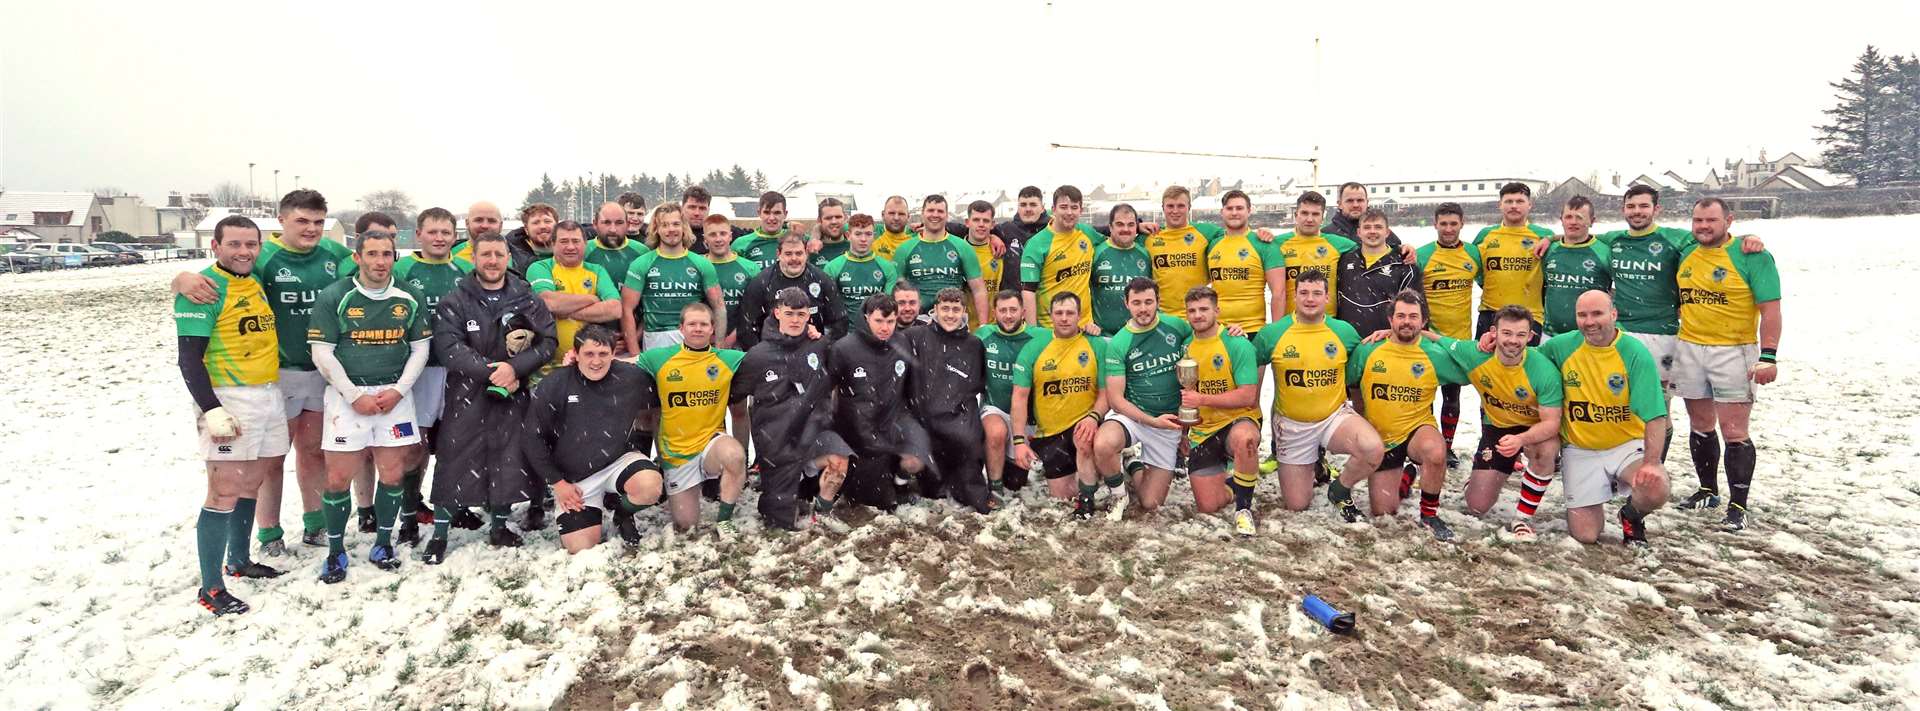 Caithness and the Exiles/Students line up in a mini-blizzard after the annual Sinclair Cadzow memorial match. Captains Marc Anderson and Stuart Kirk are holding the cup. Picture: James Gunn